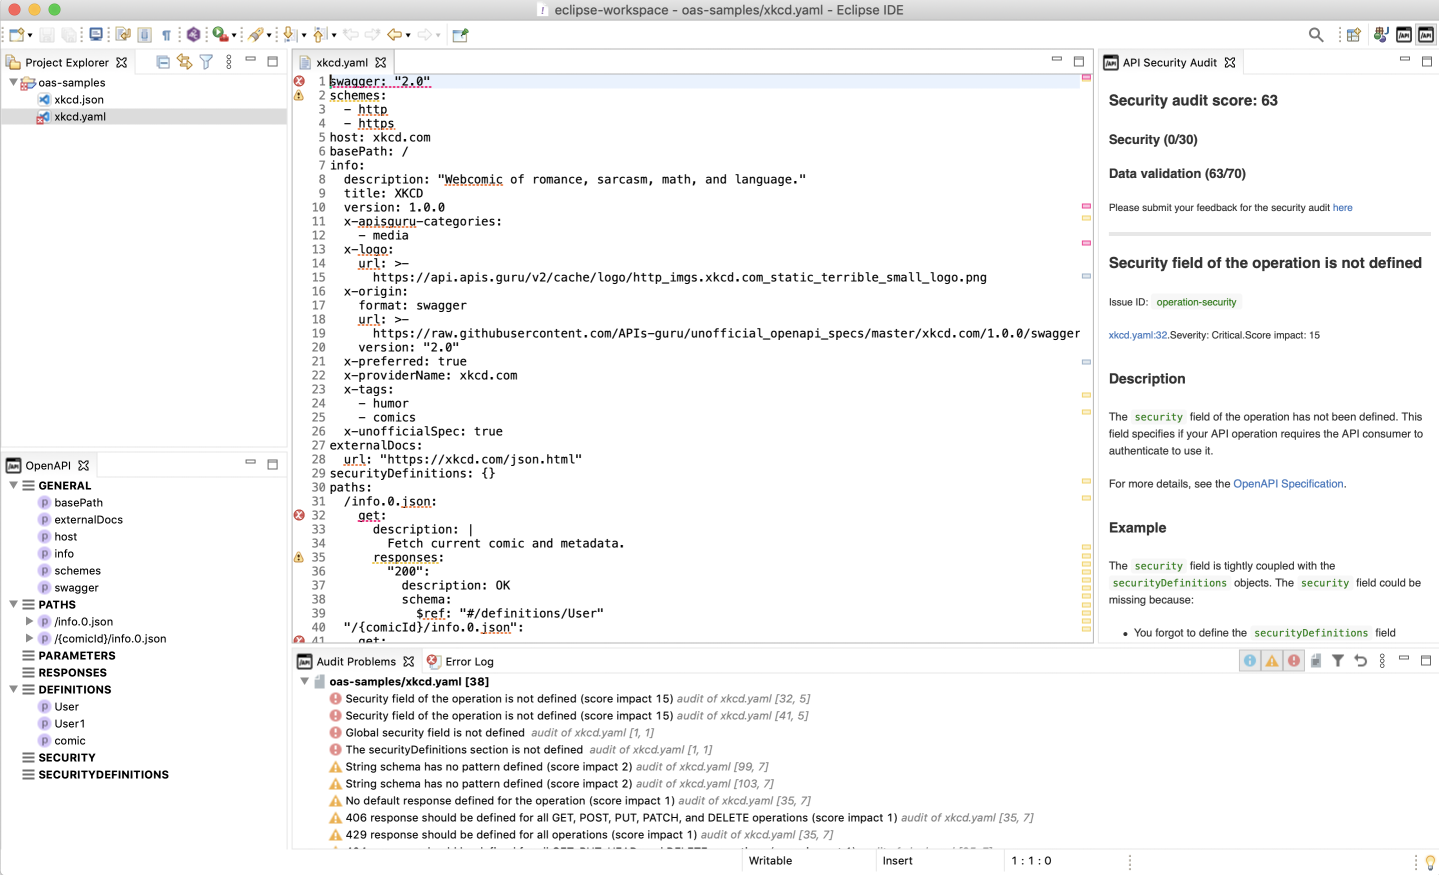 An example screenshot of an audited API definition in Eclipse.